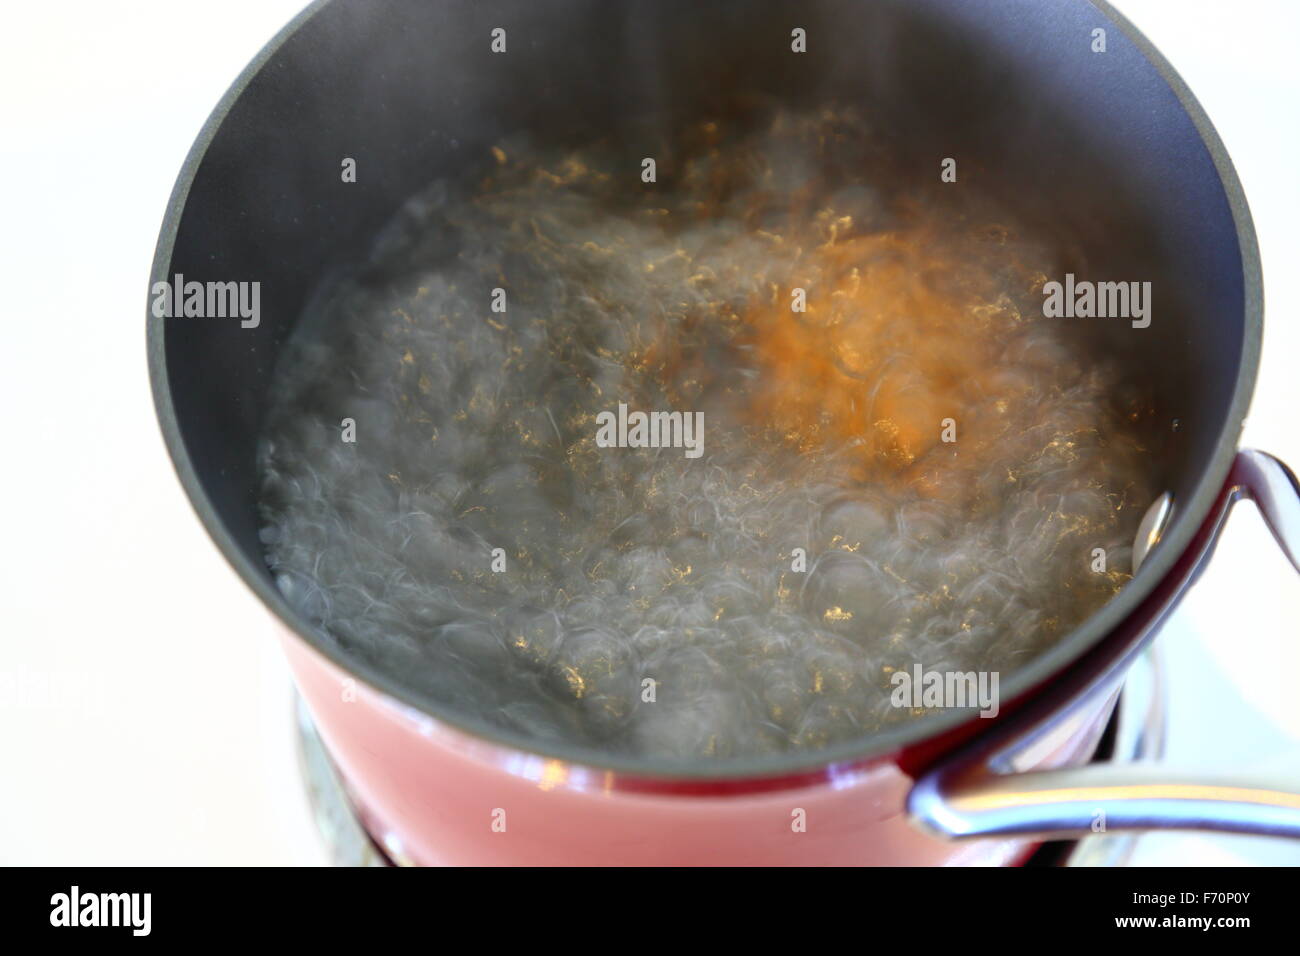 An egg boiling in a red pot on a stove top, viewed from above. Stock Photo